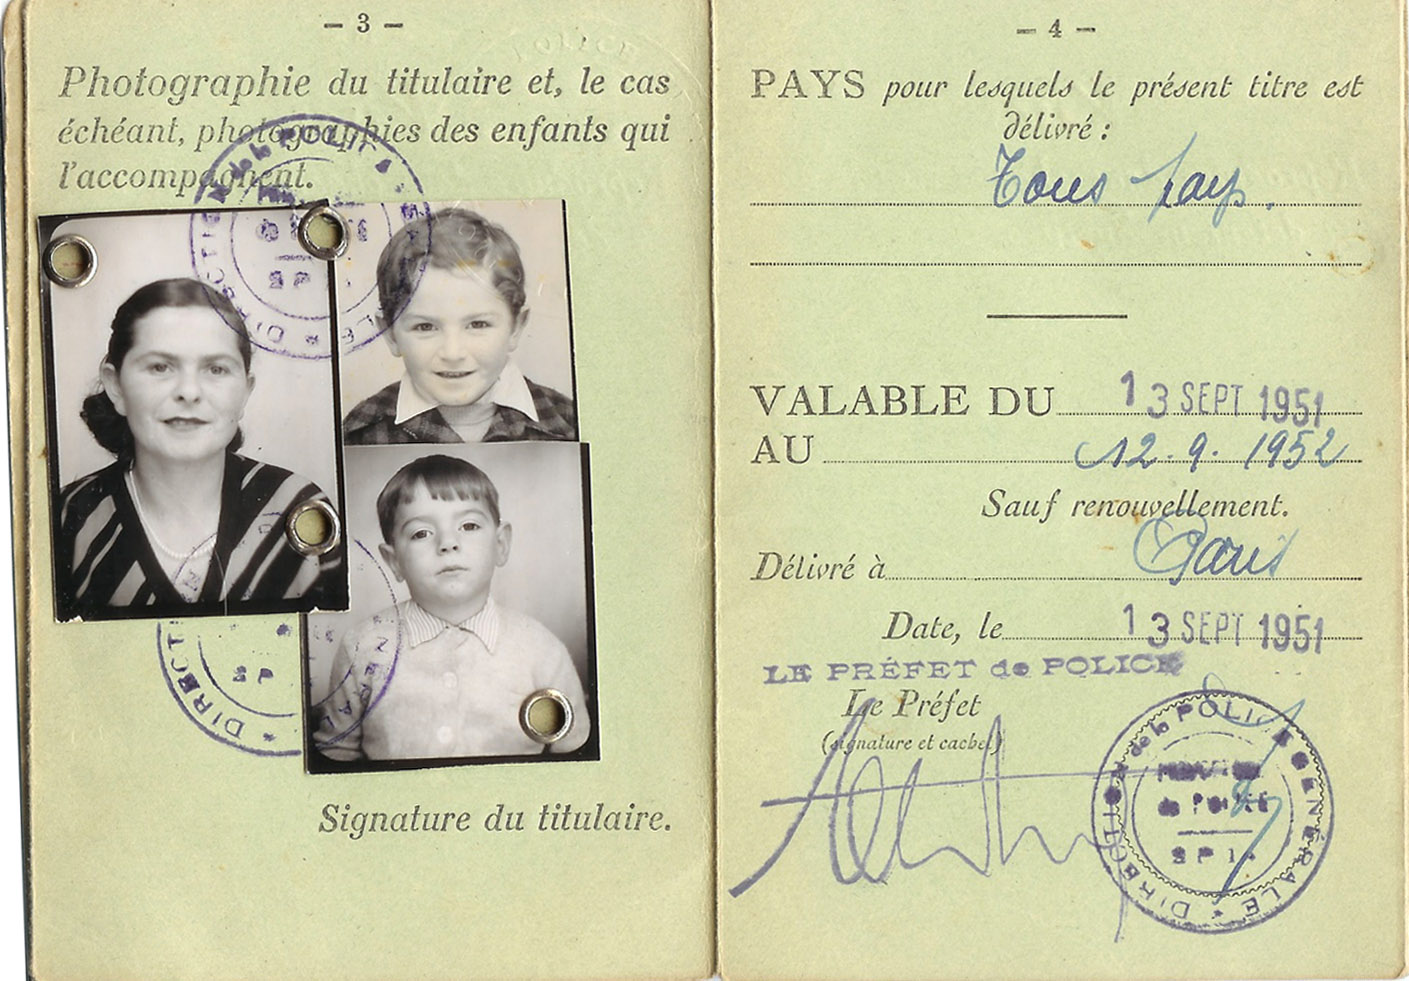 ON THE WAY TO AMERICA FROM PARIS FRANCE 1951. MY FAMILY EMMIGRATES TO AMERICA. IN ORDER TO UNDERSTAND FREEDOM AND DEMOCRACY SOMETIMES ONE MUST HAVE LOST BOTH.